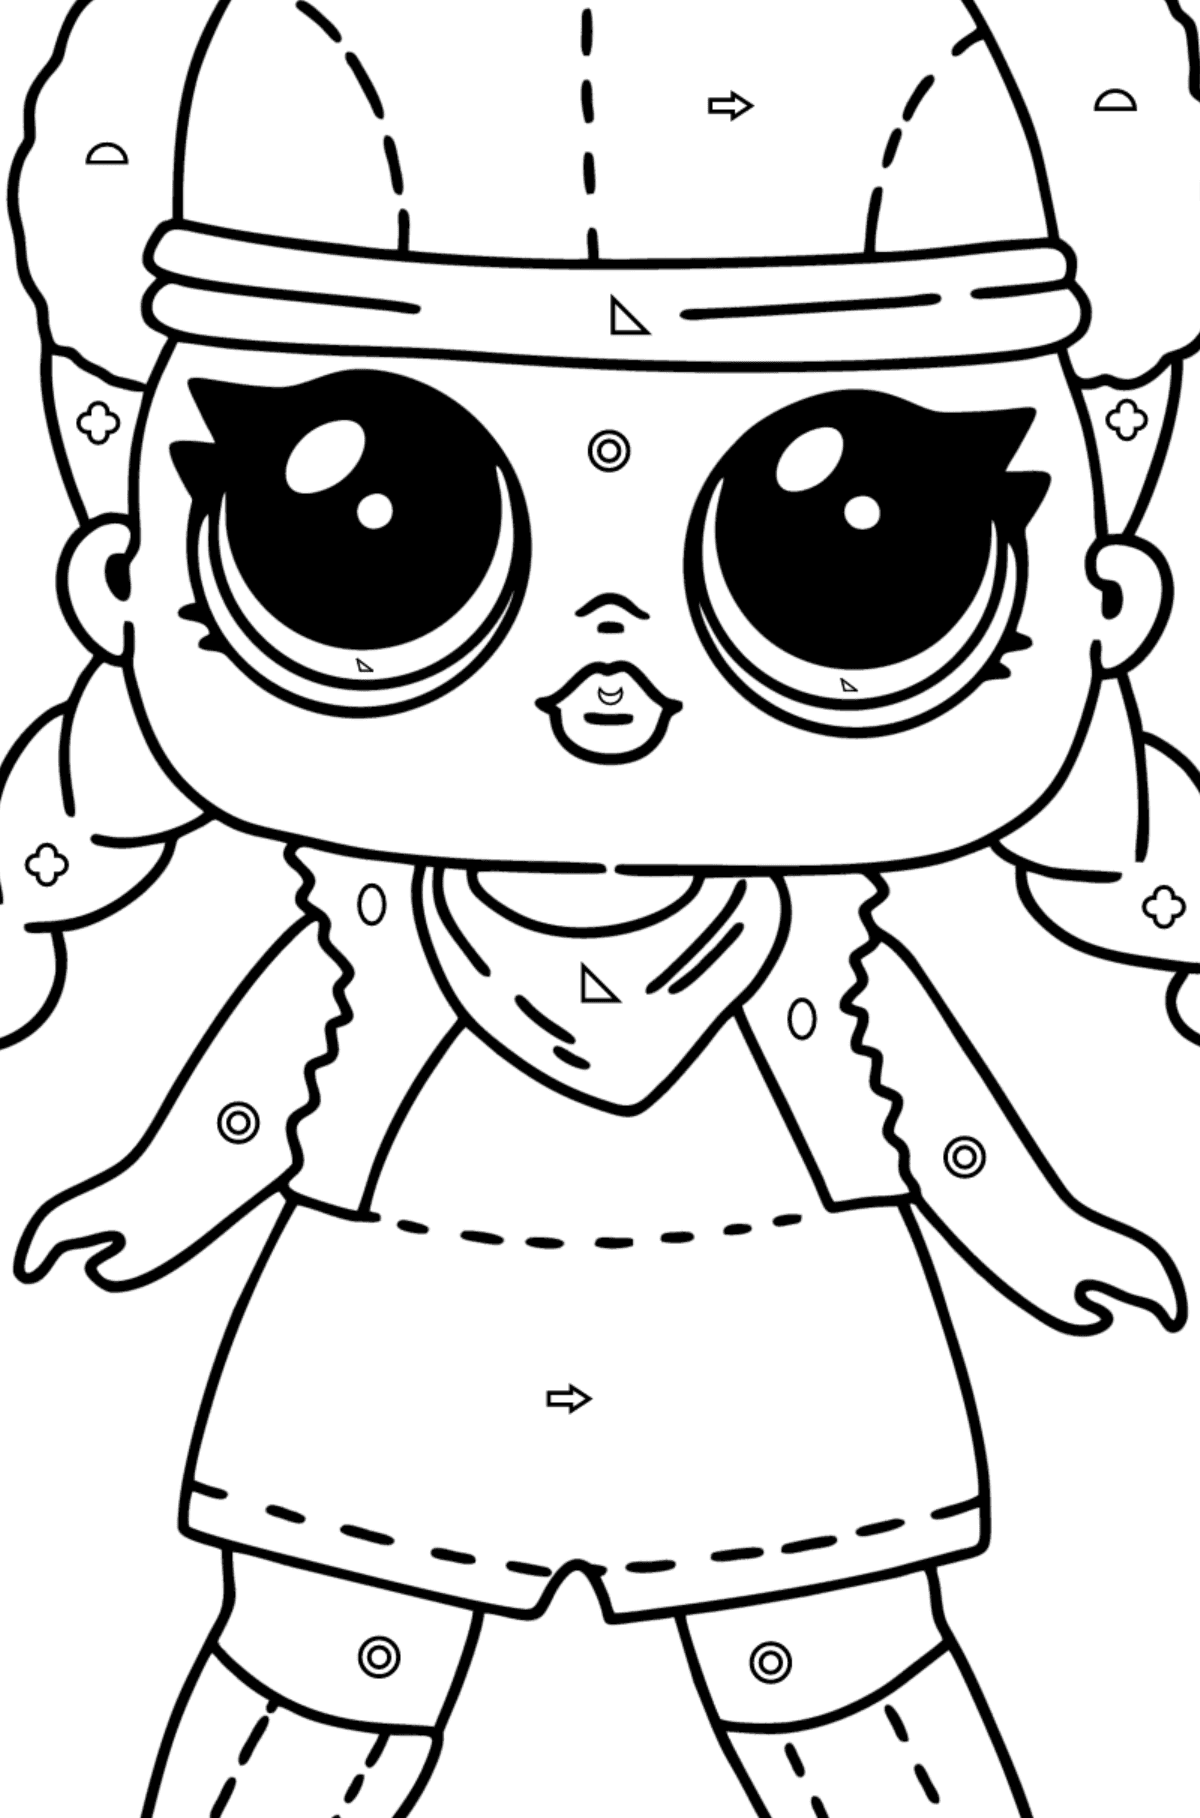 LOL Surprise Brrr B.B. coloring page - Coloring by Geometric Shapes for Kids